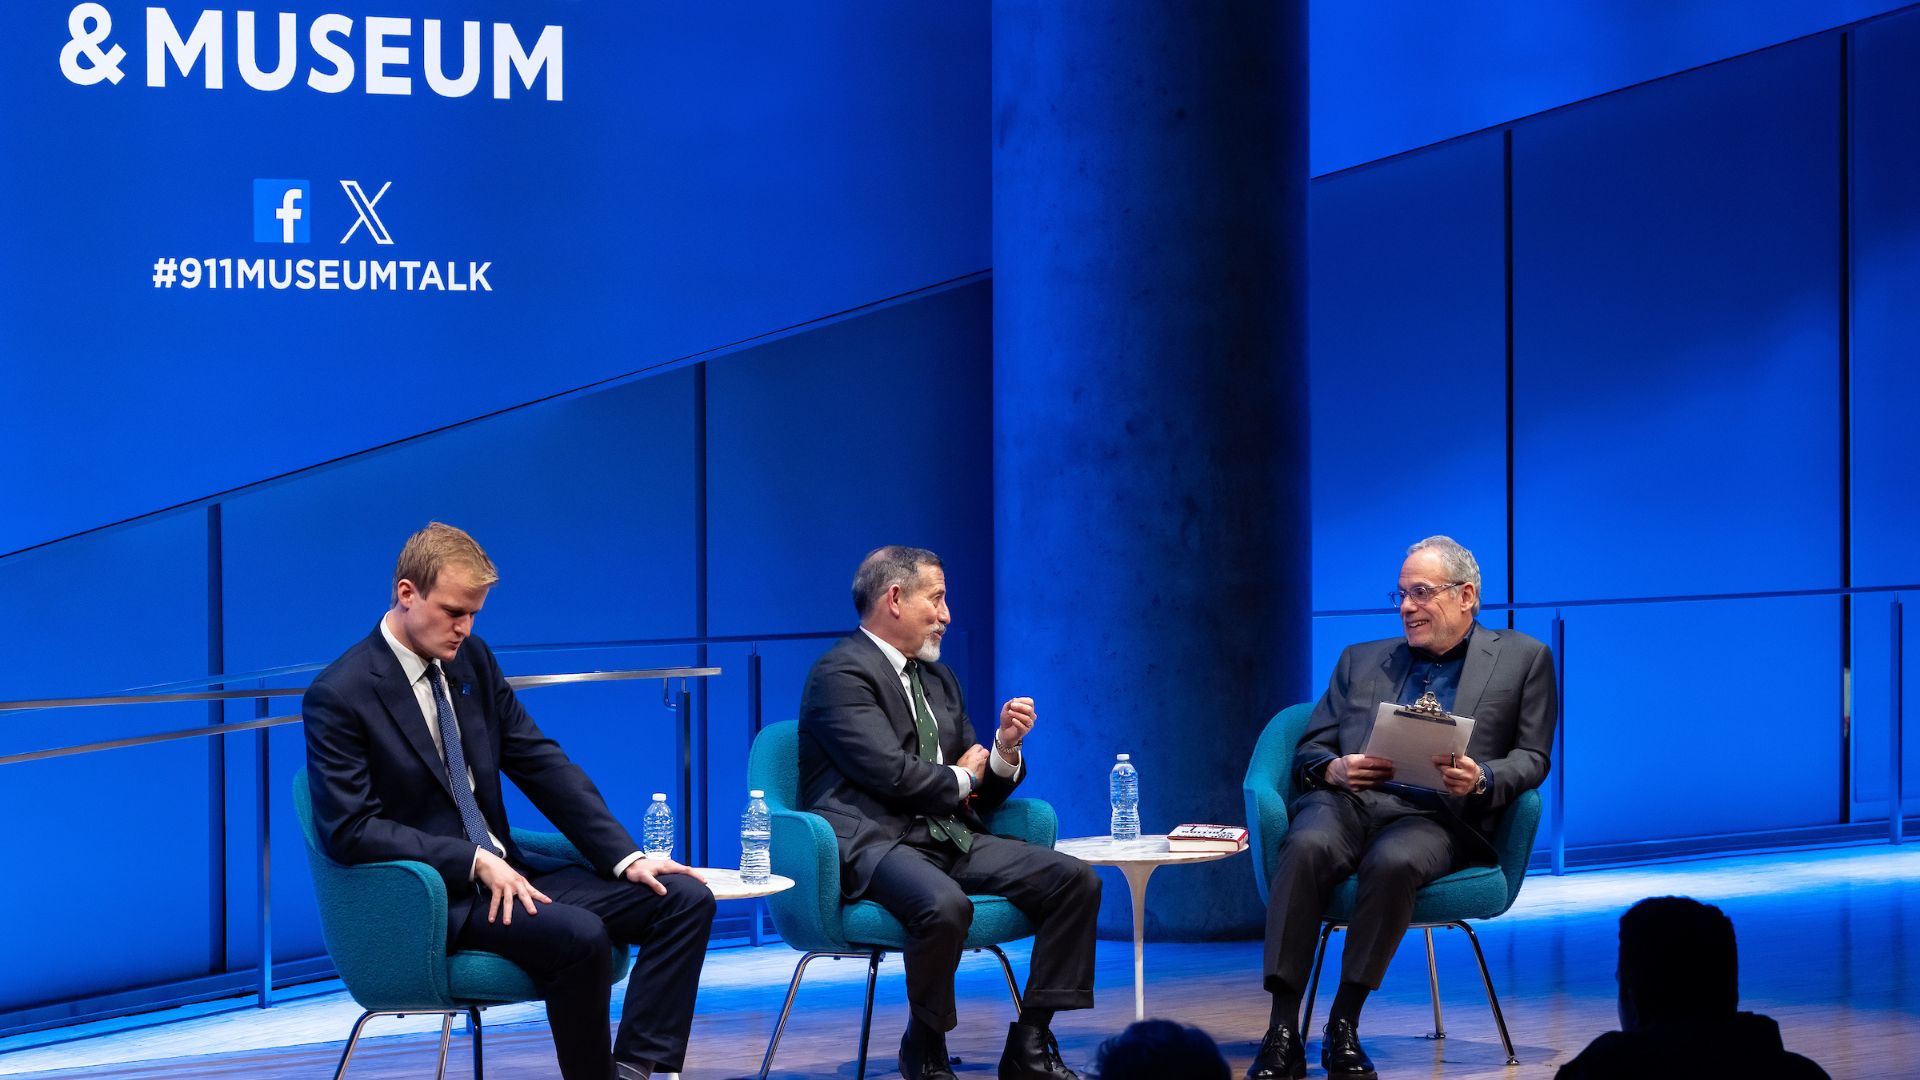 Three men seated on stage, in conversation, in front of a bright blue curtain. A portion of the 9/11 Memorial & Museum logo is visible. 